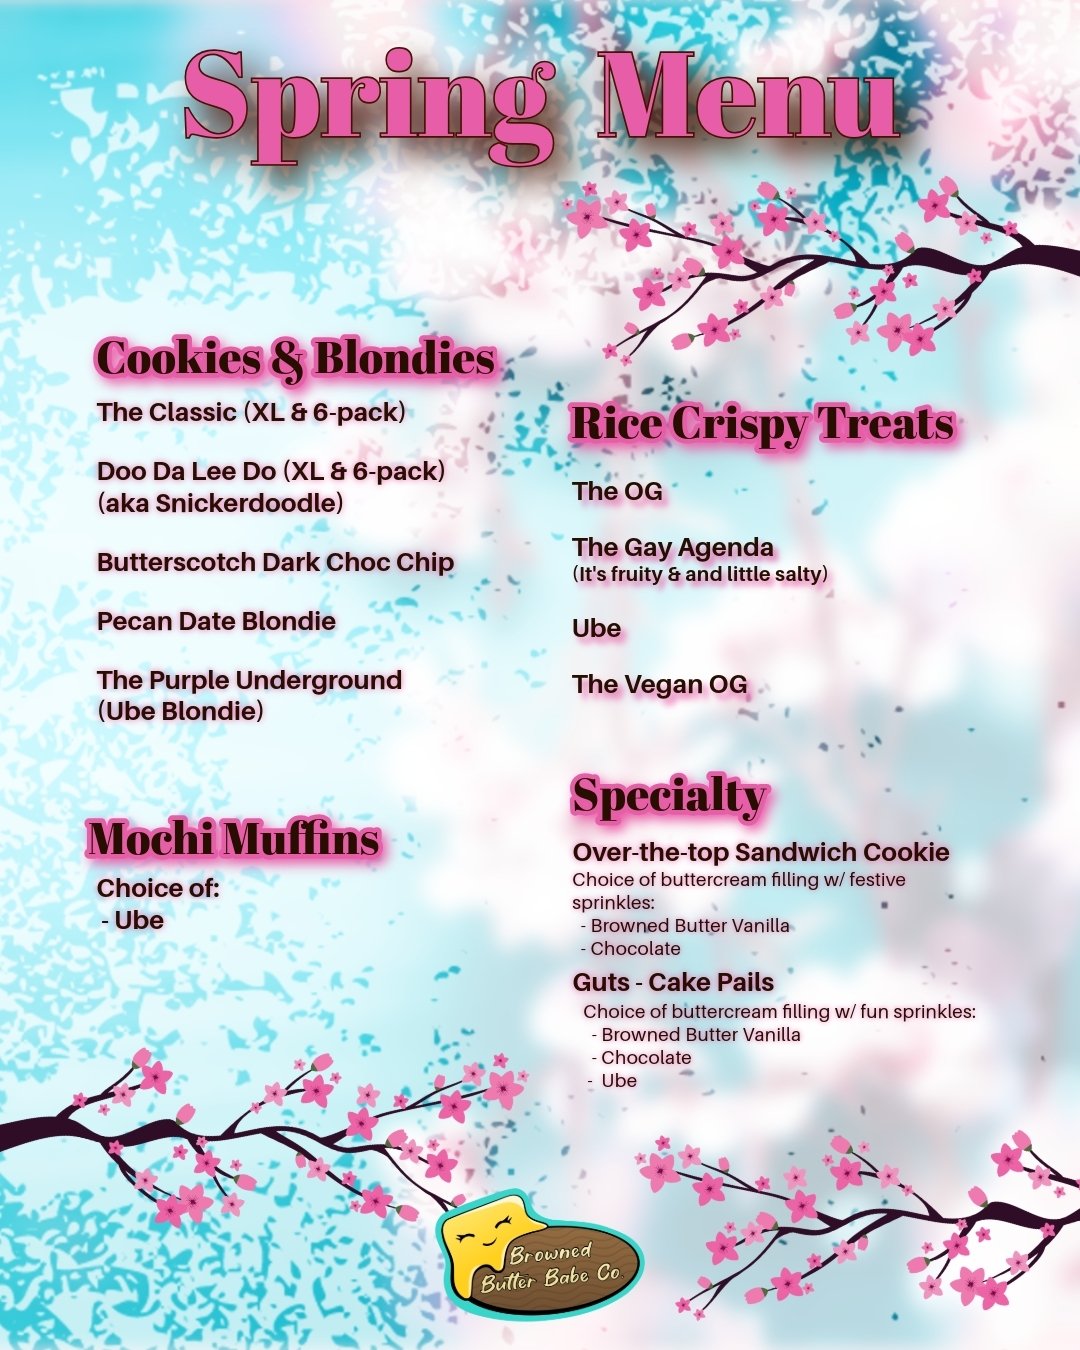 🌸 Menu 🌸
This week's menu! There will be mochi muffins, ube flavored, and cake pails are making comeback! 
We'll be at the @ohlonecollege.fleamarket 🌧️ or ☀️
.
.
#ohlonecollege #fleamarket #farmersmarket #cottagebaker #cottagebakery #rainorshine #